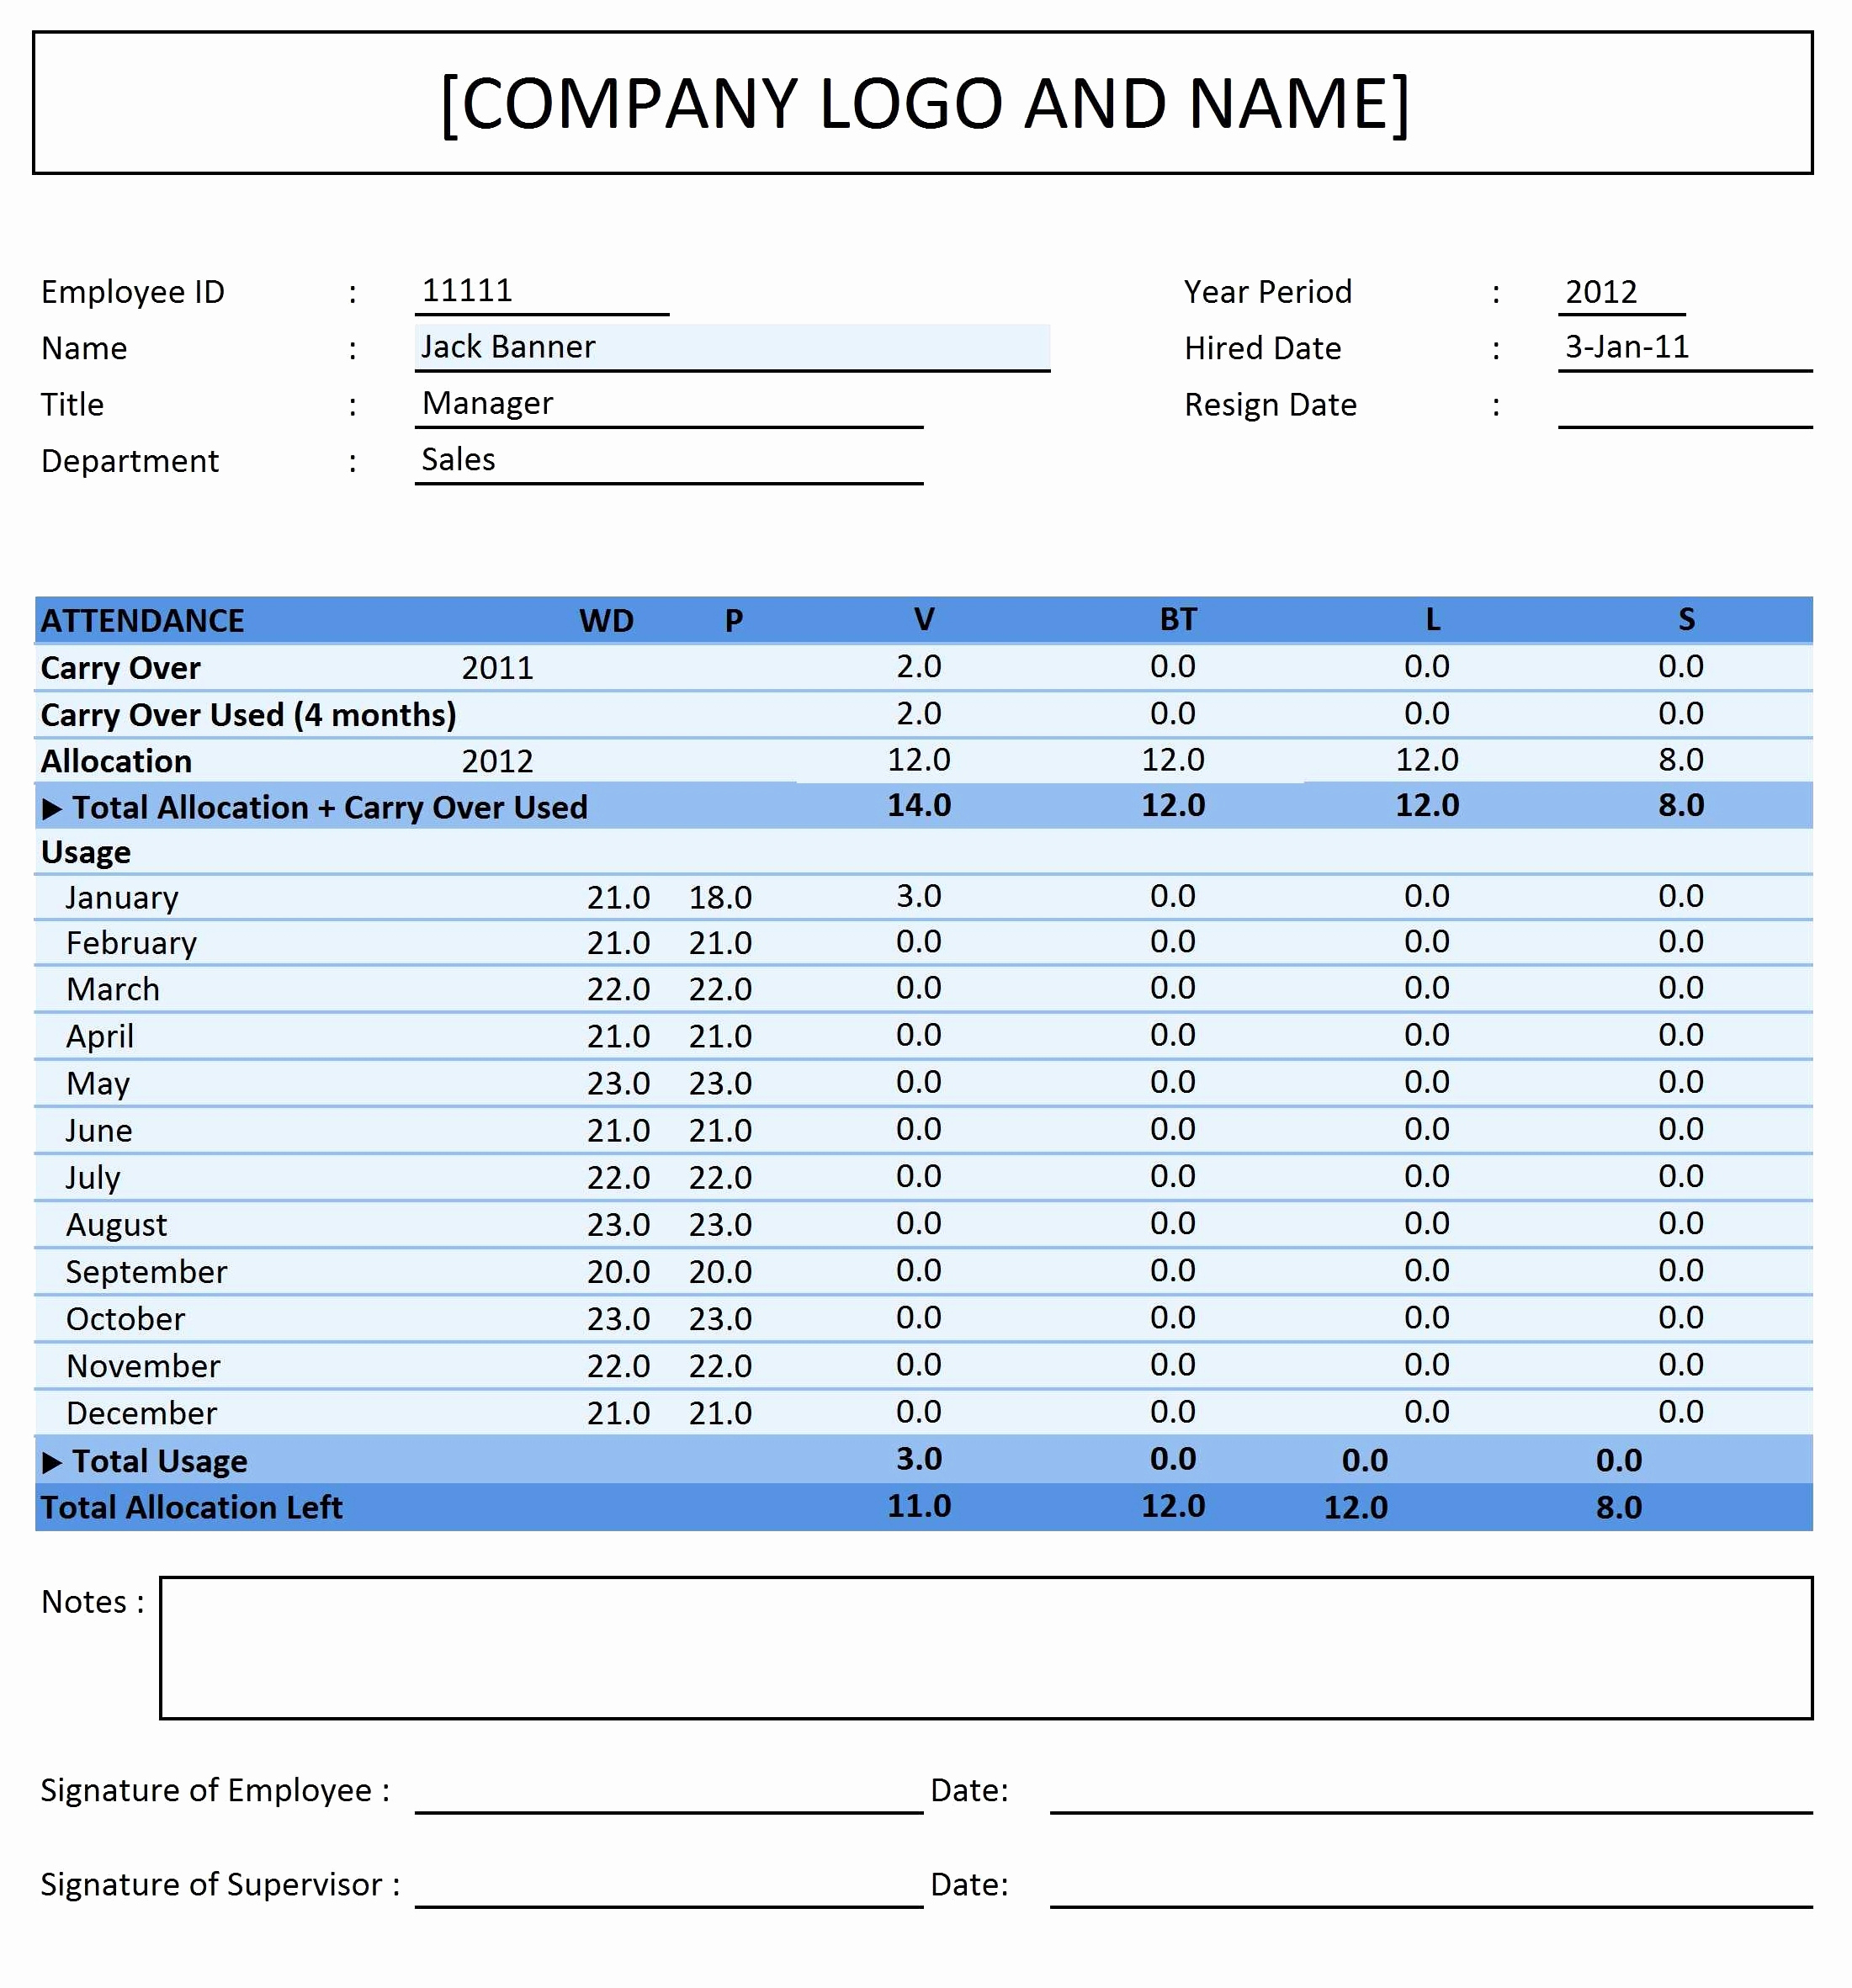 Leave Tracking Spreadsheet Pertaining To Employee Vacation Tracker Template Luxury Leave Tracking Spreadsheet